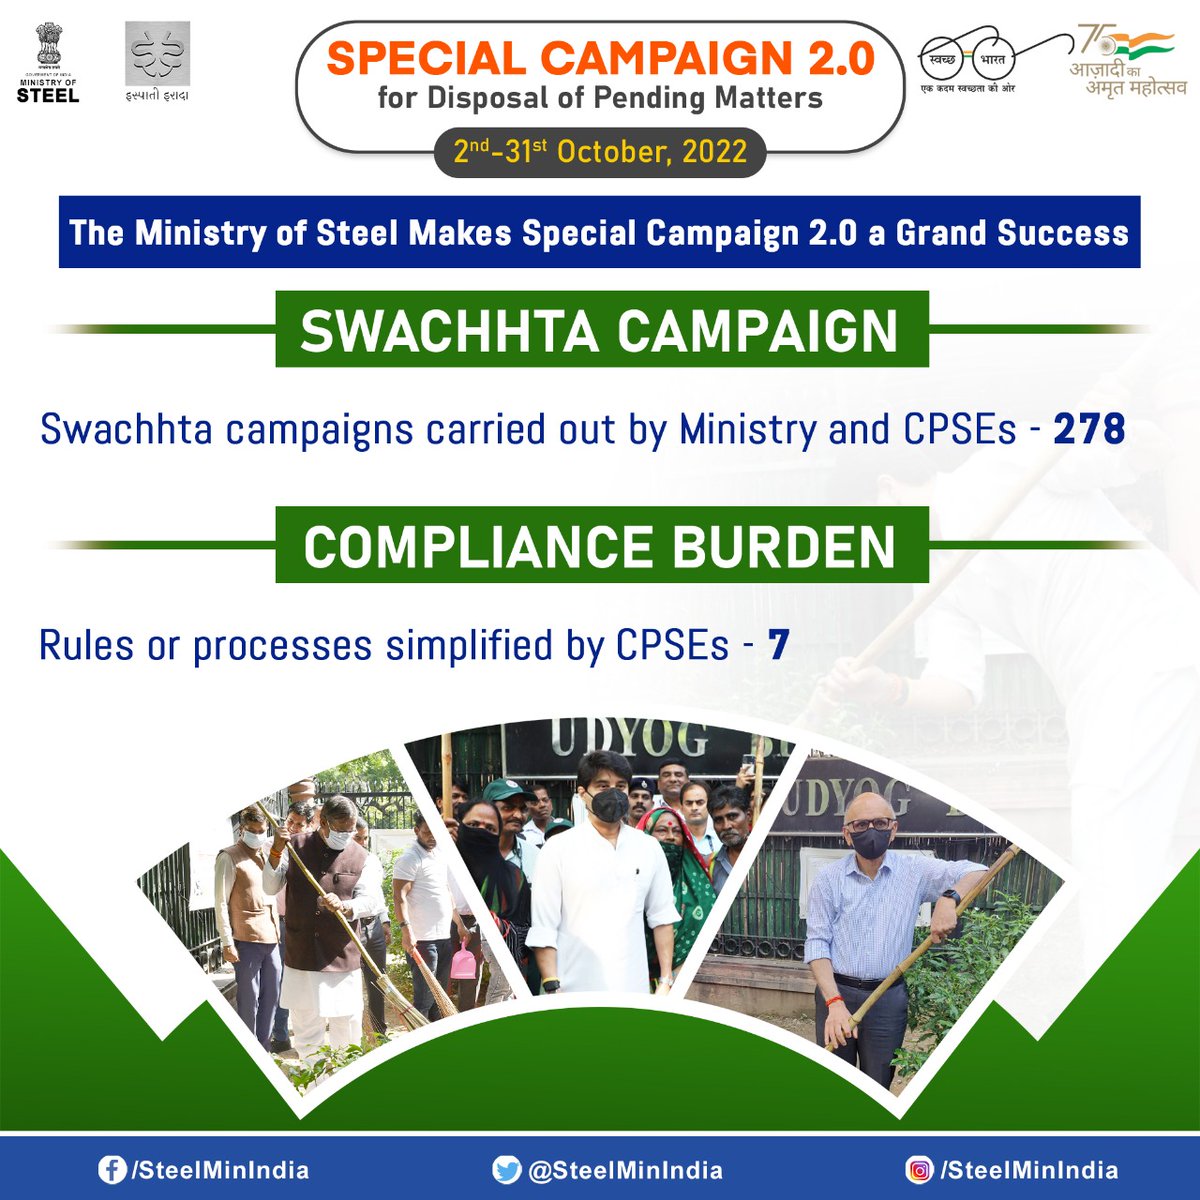 Ministry of Steel and its CPSEs actively participated on various social media platforms to raise public awareness and to highlight Gandhi Ji's vision of 'Cleanliness is Next to Godliness.' #SpecialCampaign2.0 #SwachhBharat #CleanIndia @JM_Scindia @fskulaste @AmritMahotsav